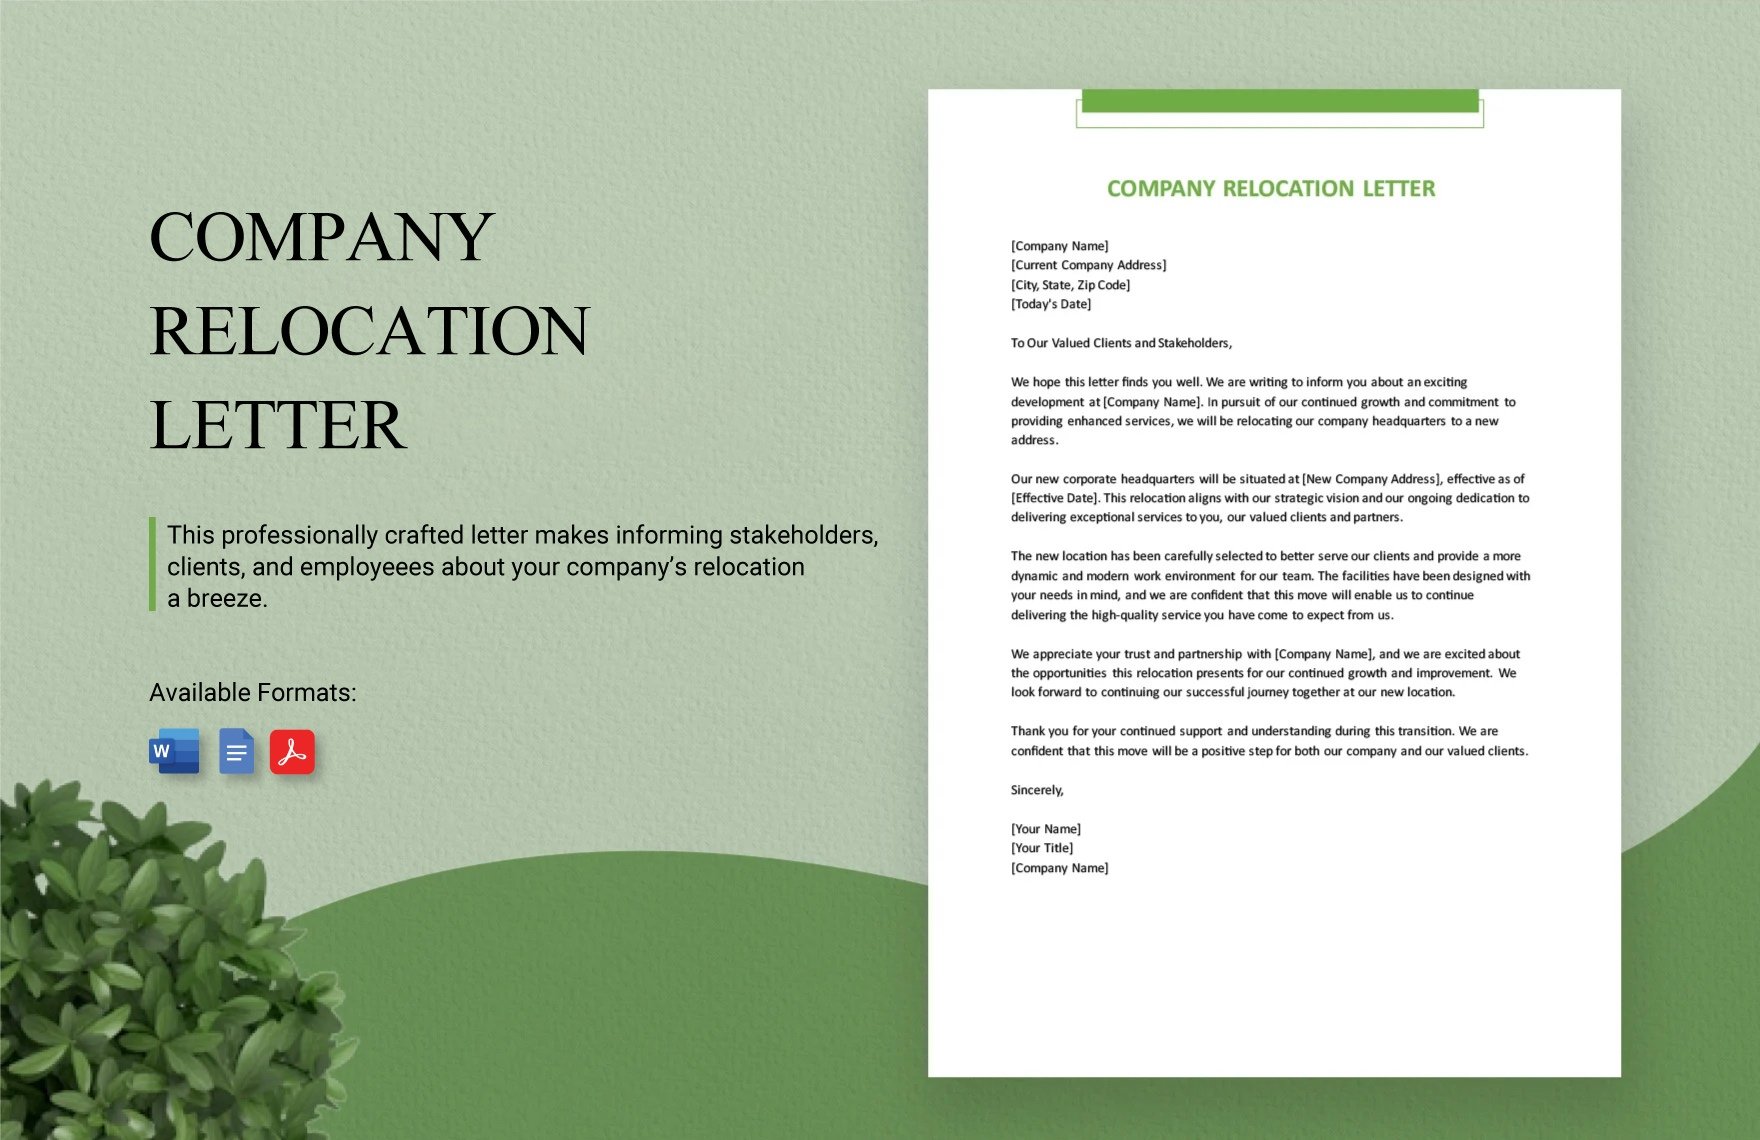 Company Relocation Letter in Word, Google Docs, PDF